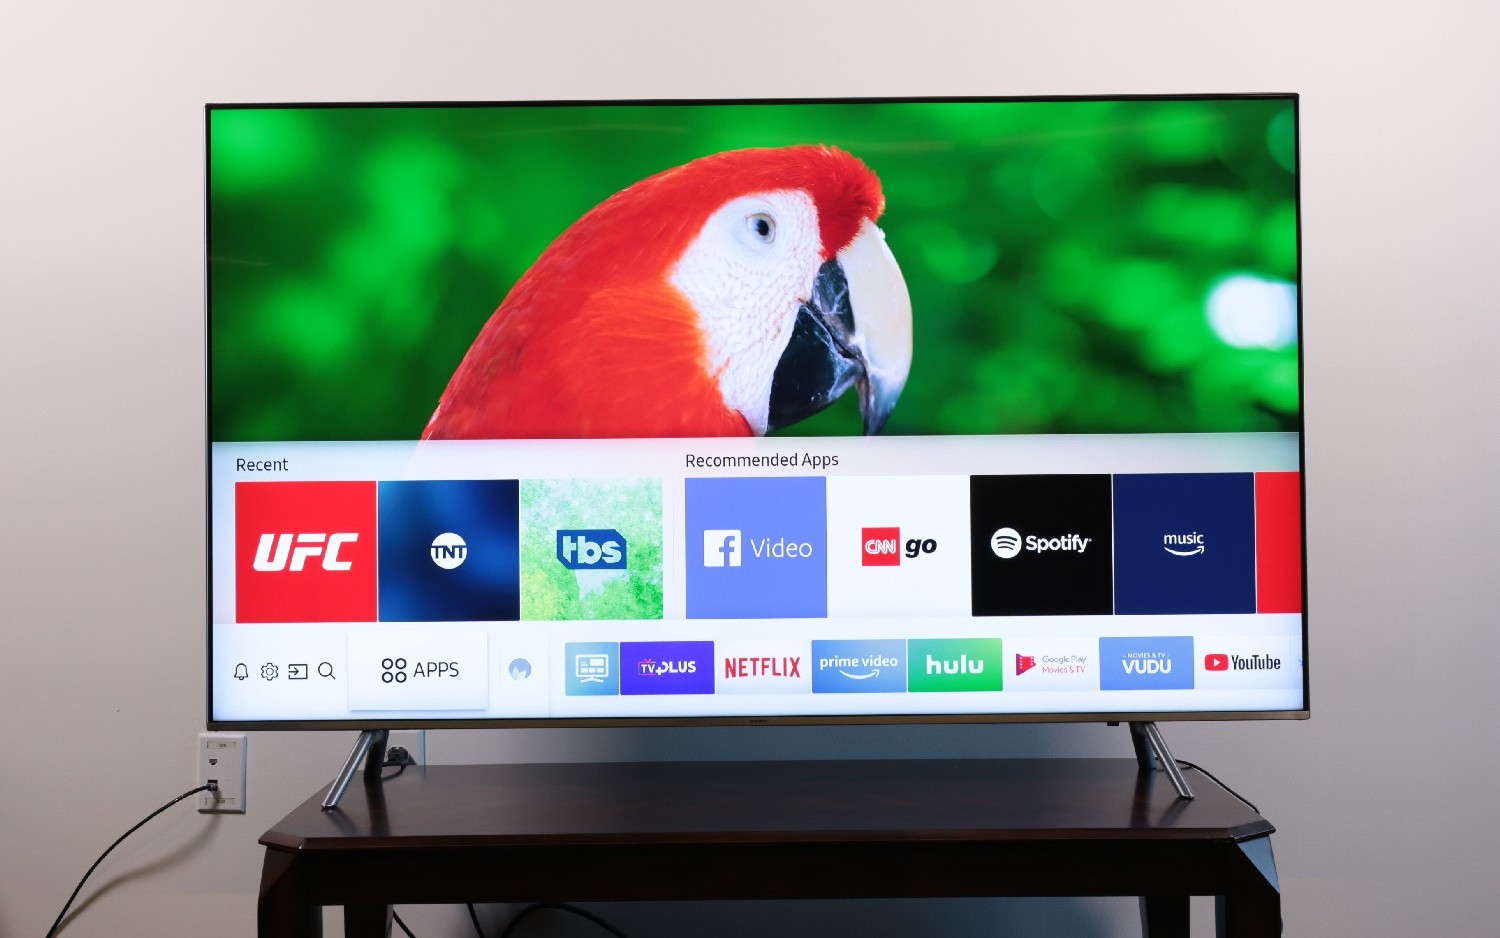 How To Set Up Screen Mirroring On 2018 Samsung Tvs Samsung Tv Settings Guide What To Enable Disable And Tweak Tom S Guide